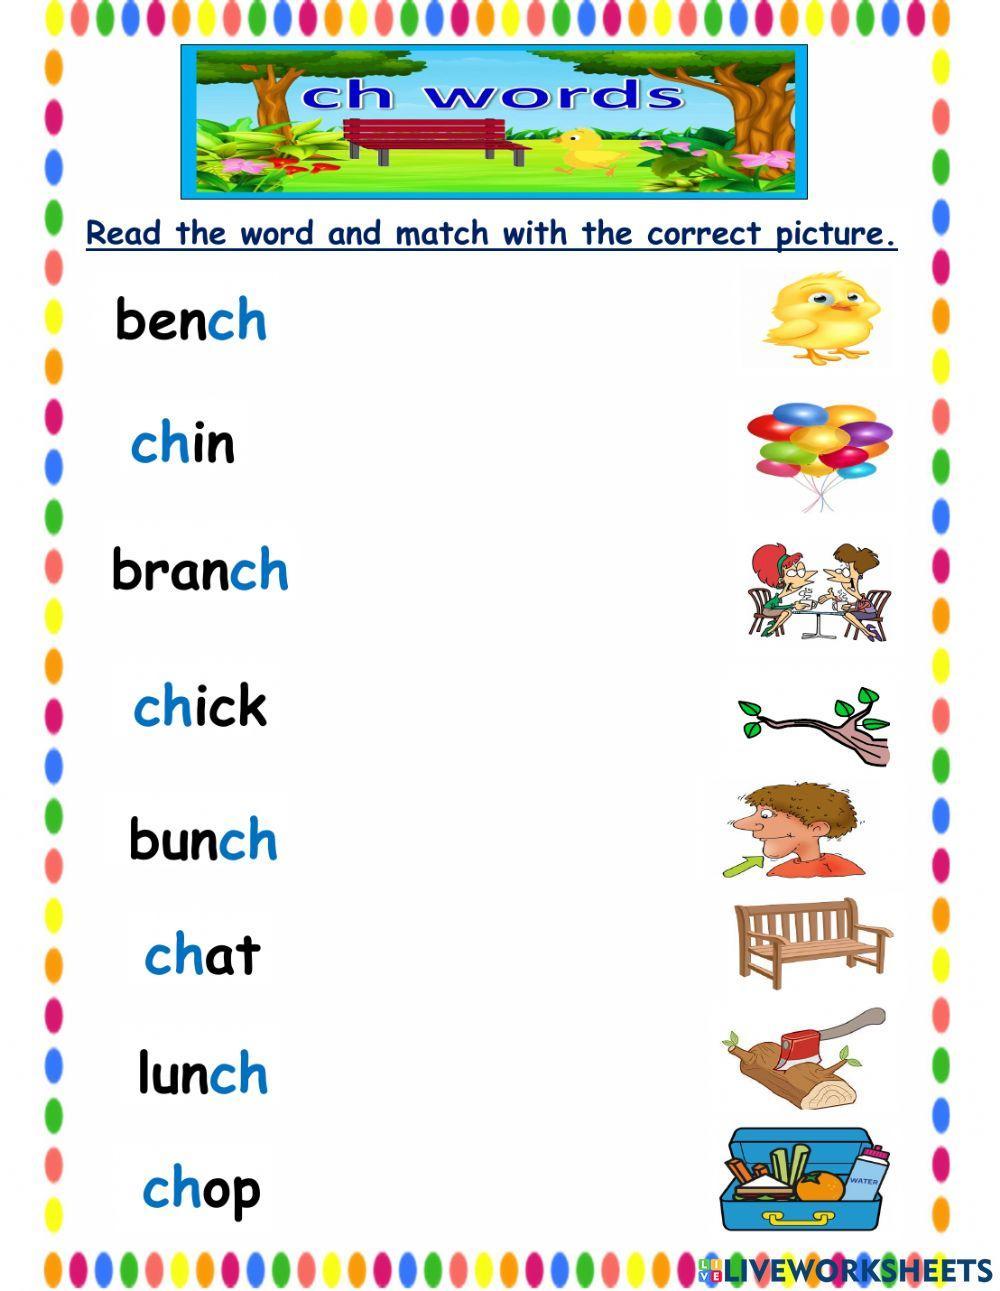 Digraph ch beginning and ending words